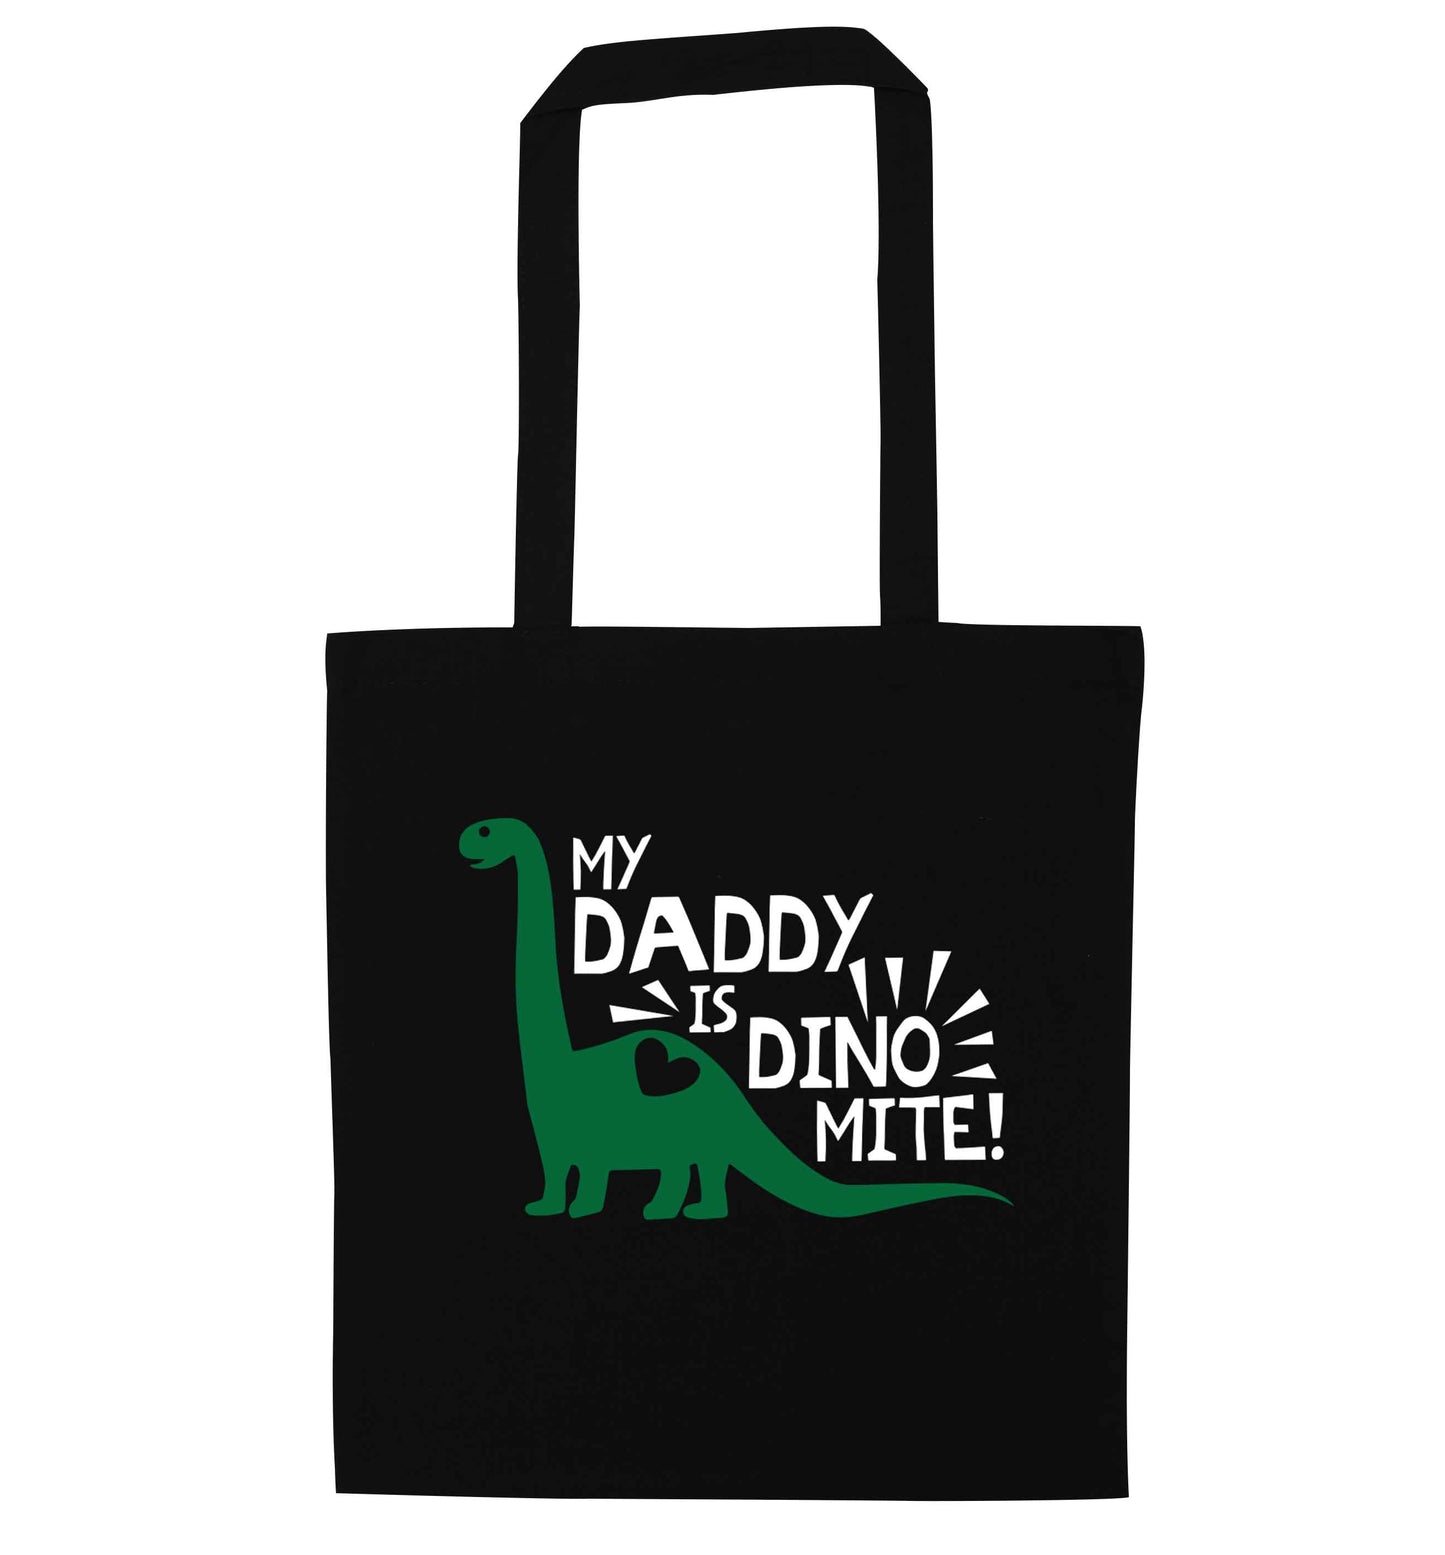 My daddy is dinomite! black tote bag